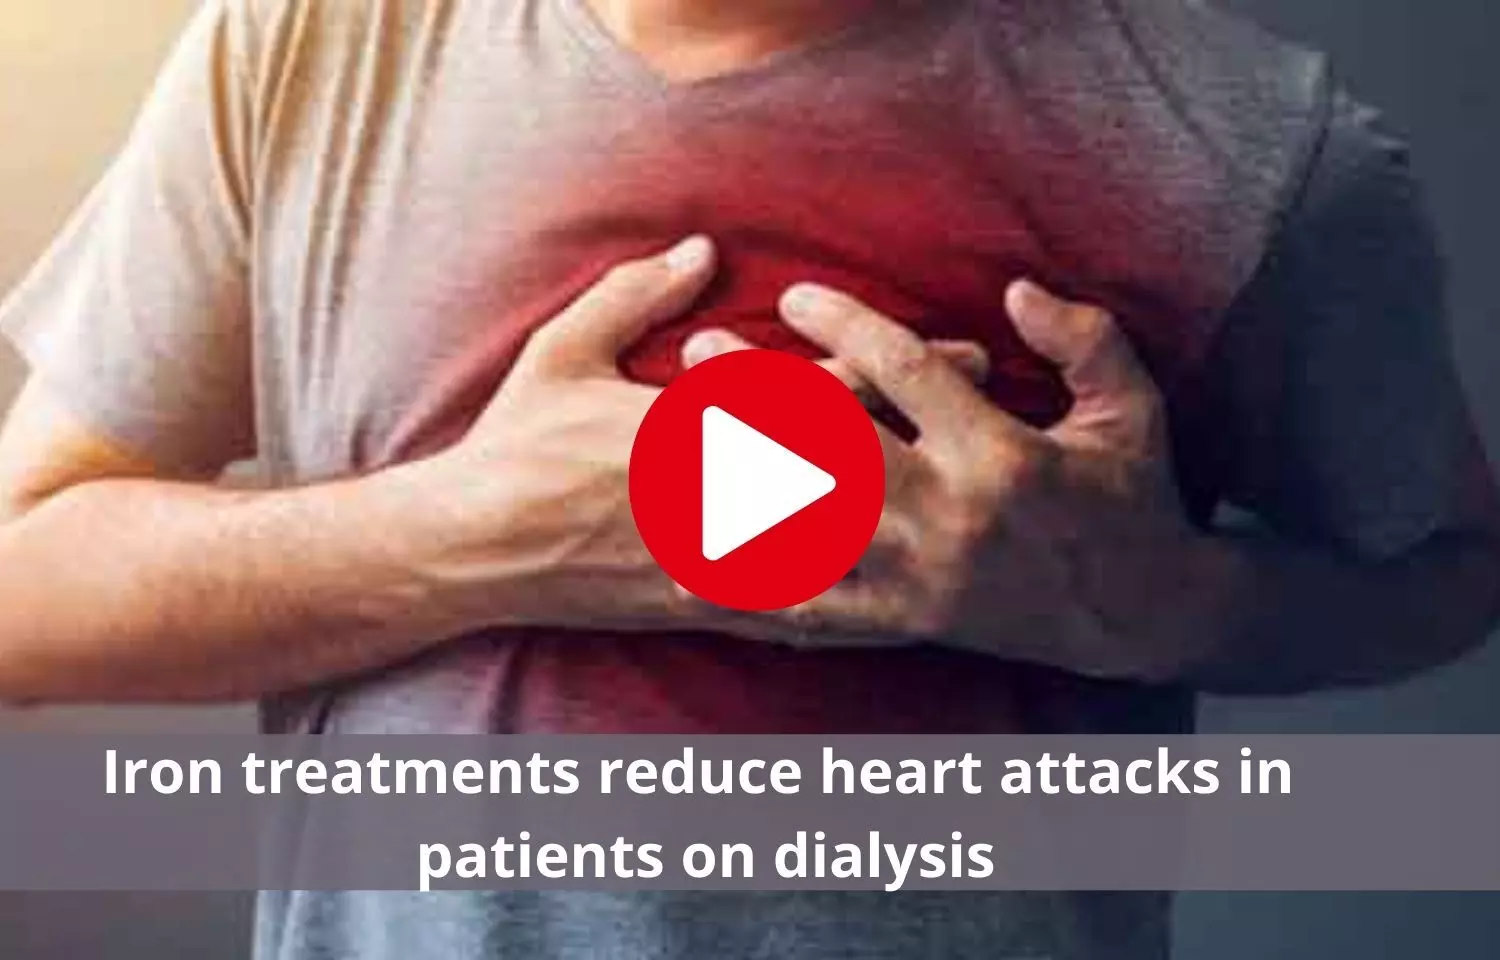 Treatment with iron decreases heart attack incidence in dialysis patients